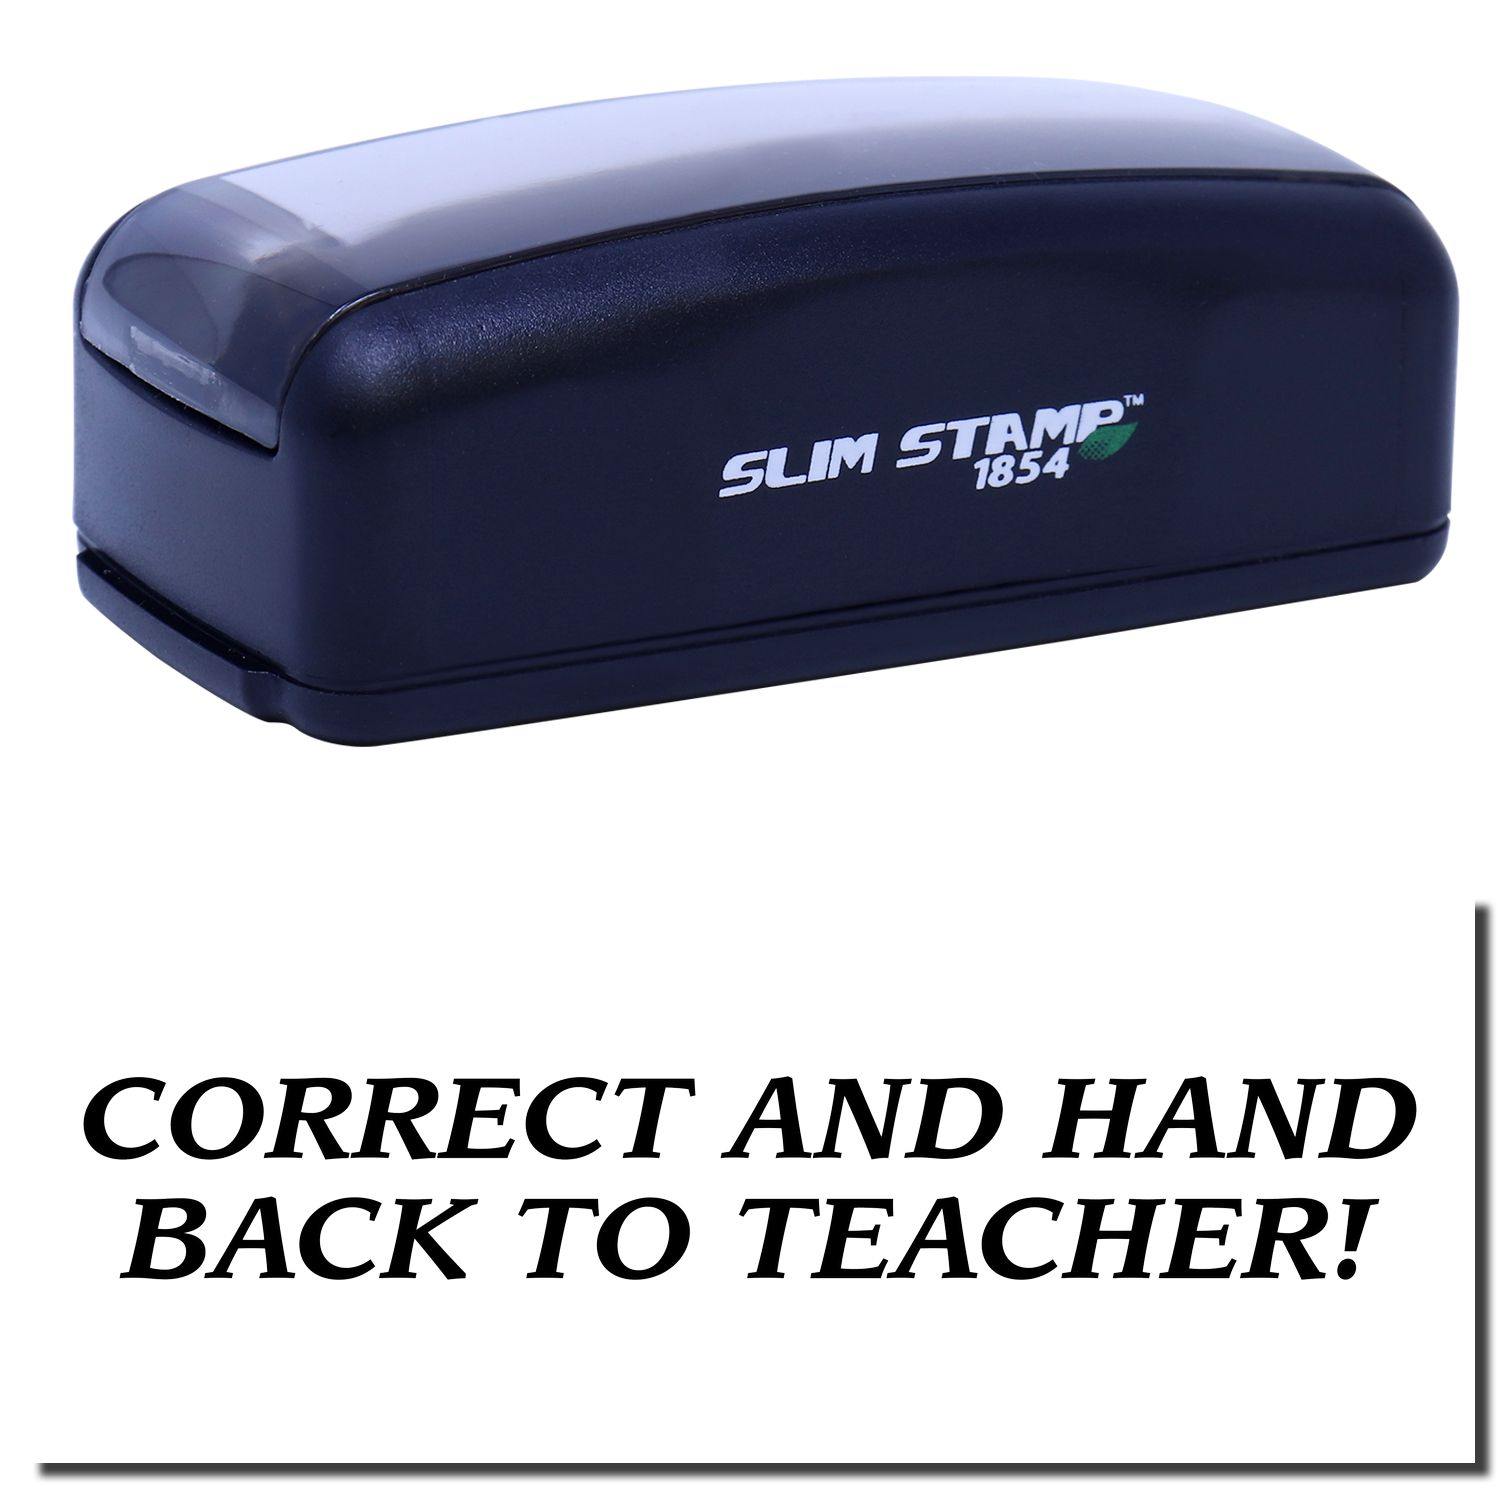 A stock office pre-inked stamp with a stamped image showing how the text "CORRECT AND HAND BACK TO TEACHER!" in a large font is displayed after stamping.